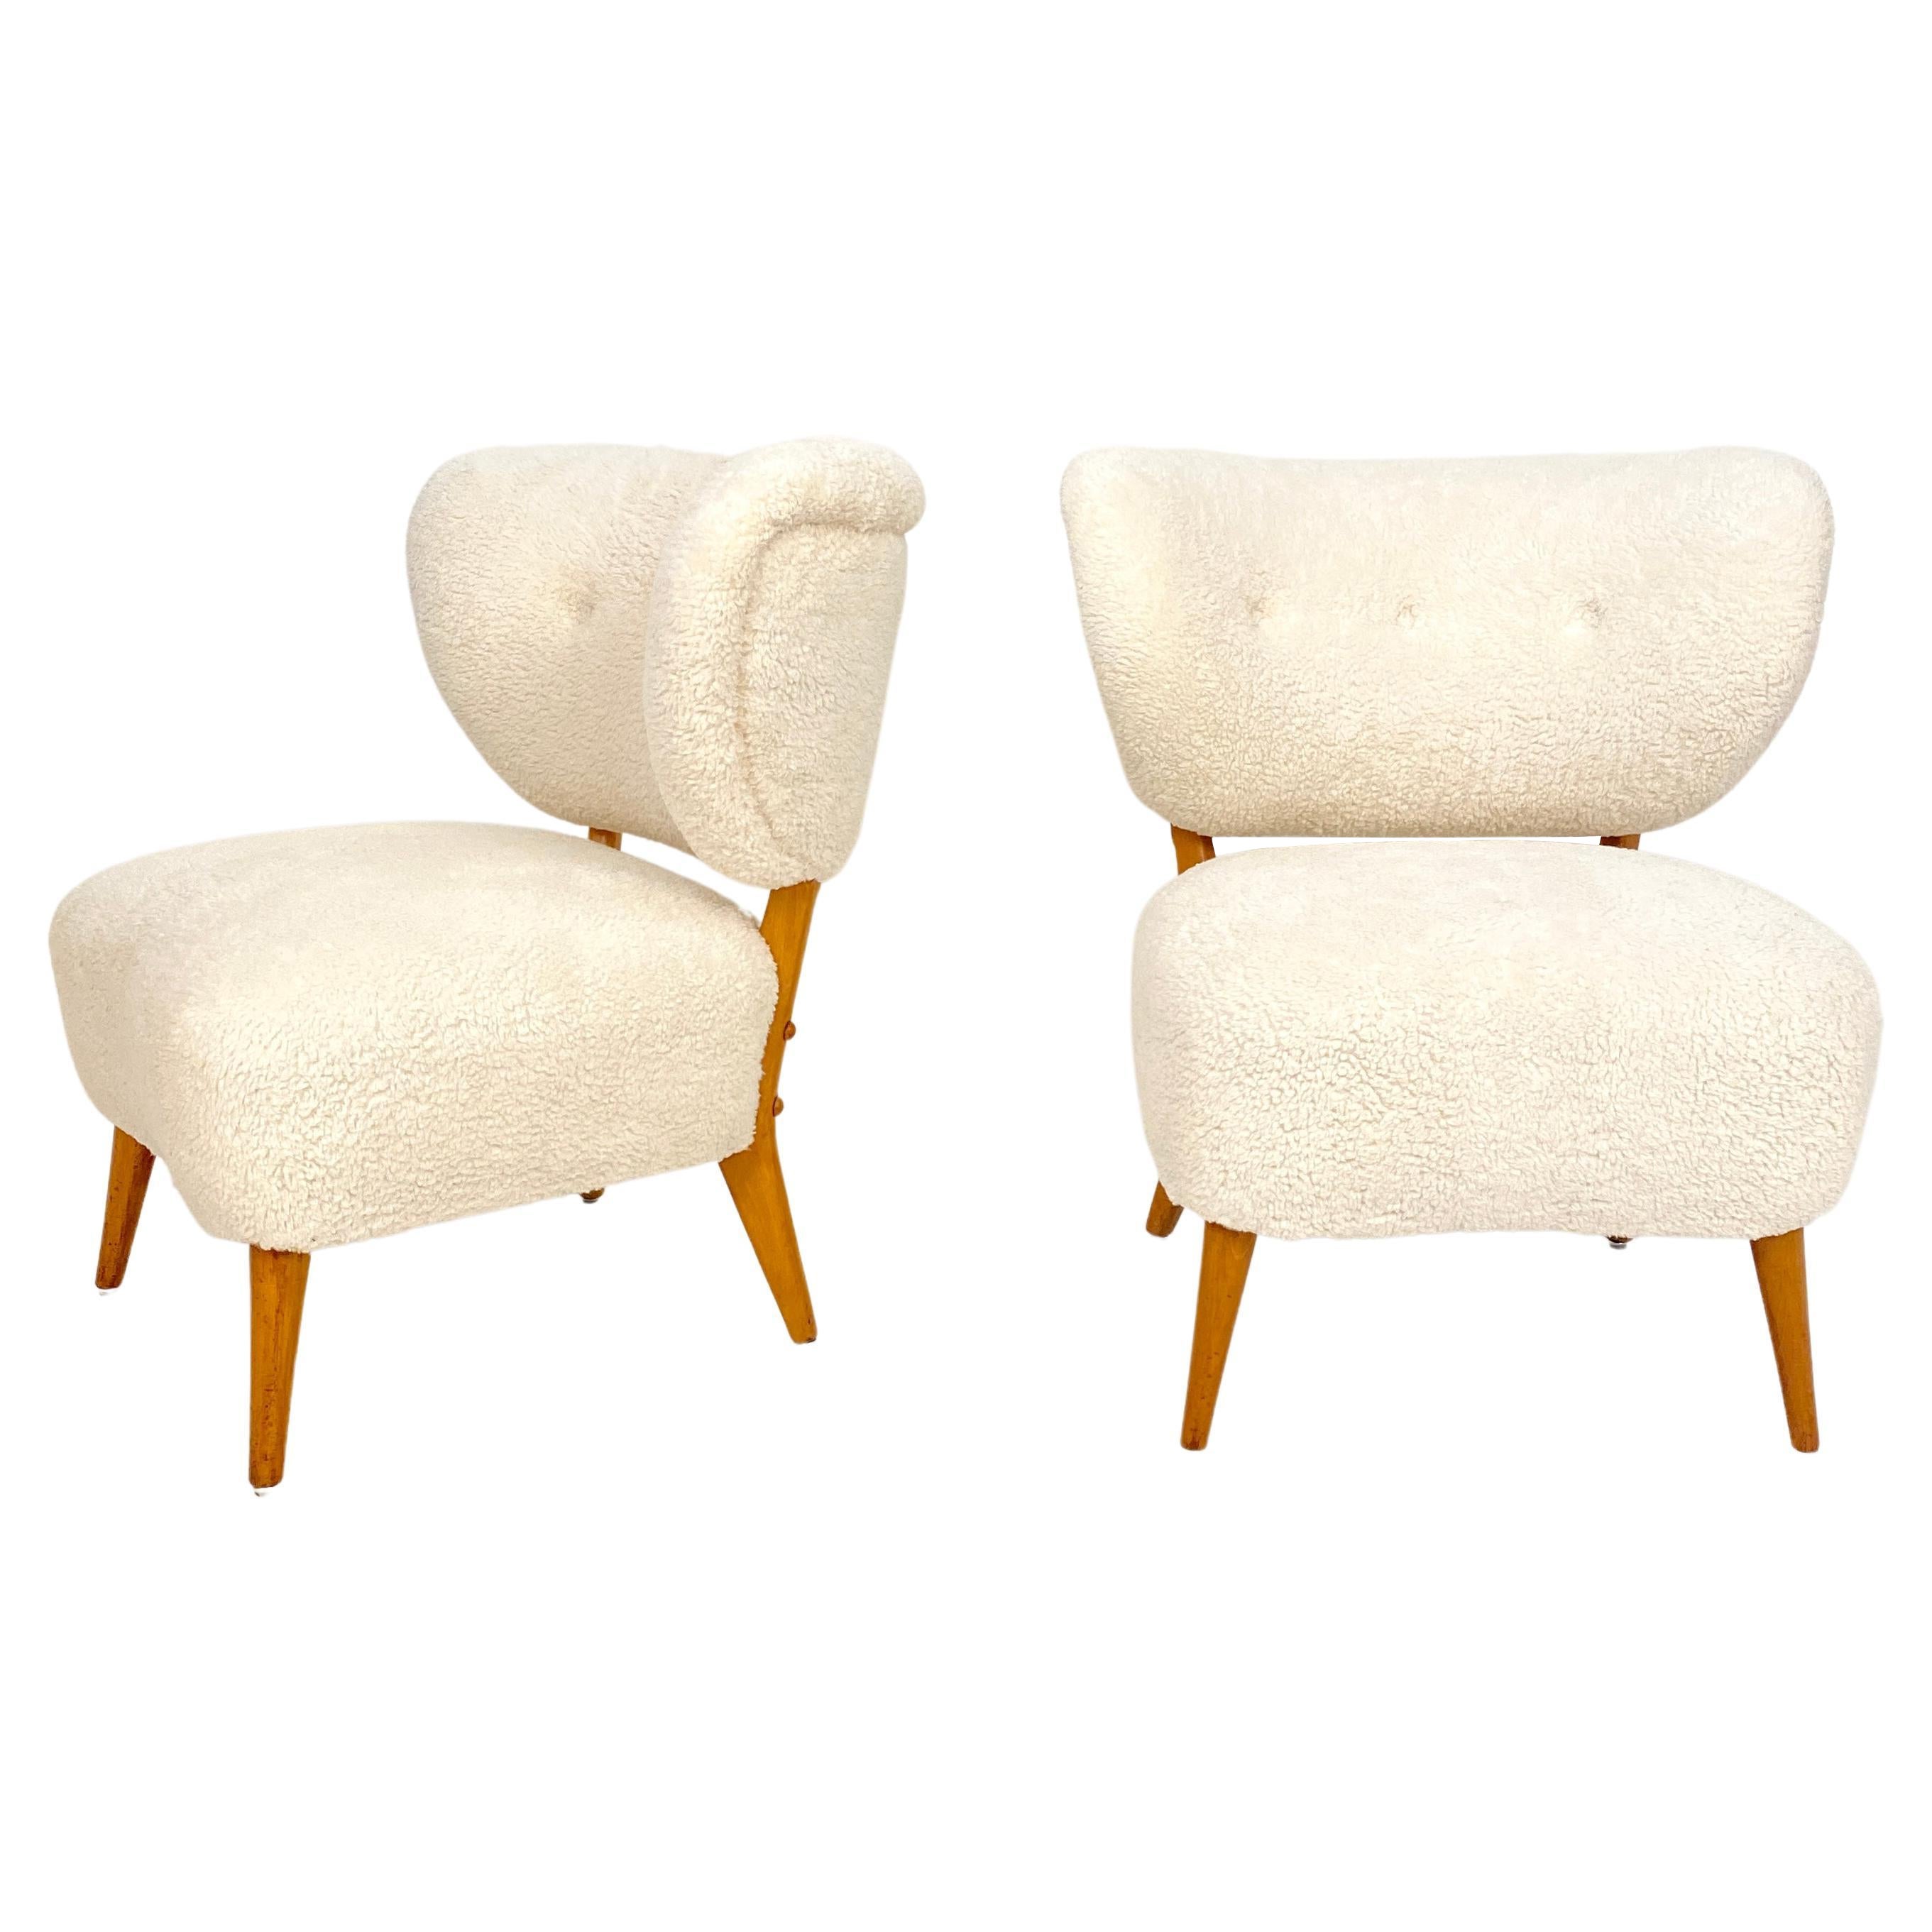 Pair of Boucle Mid-Century Lounge Chairs by Otto Schultz in Teddy Fur, 1950s